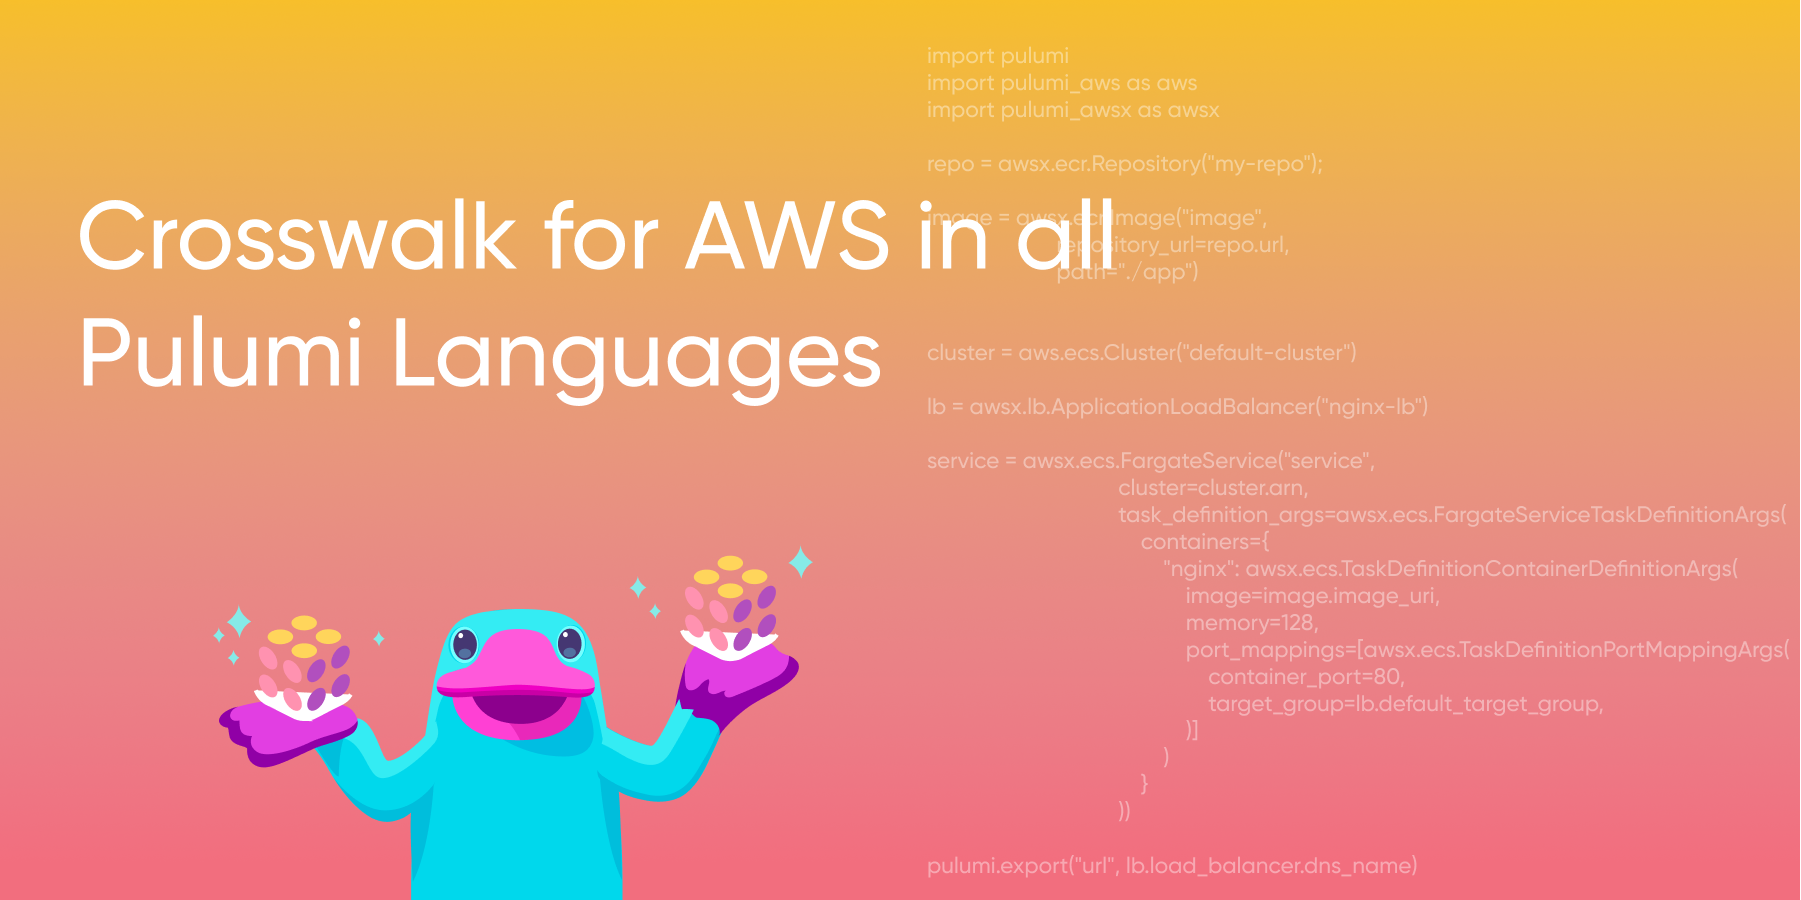 Crosswalk for AWS in all Pulumi Languages